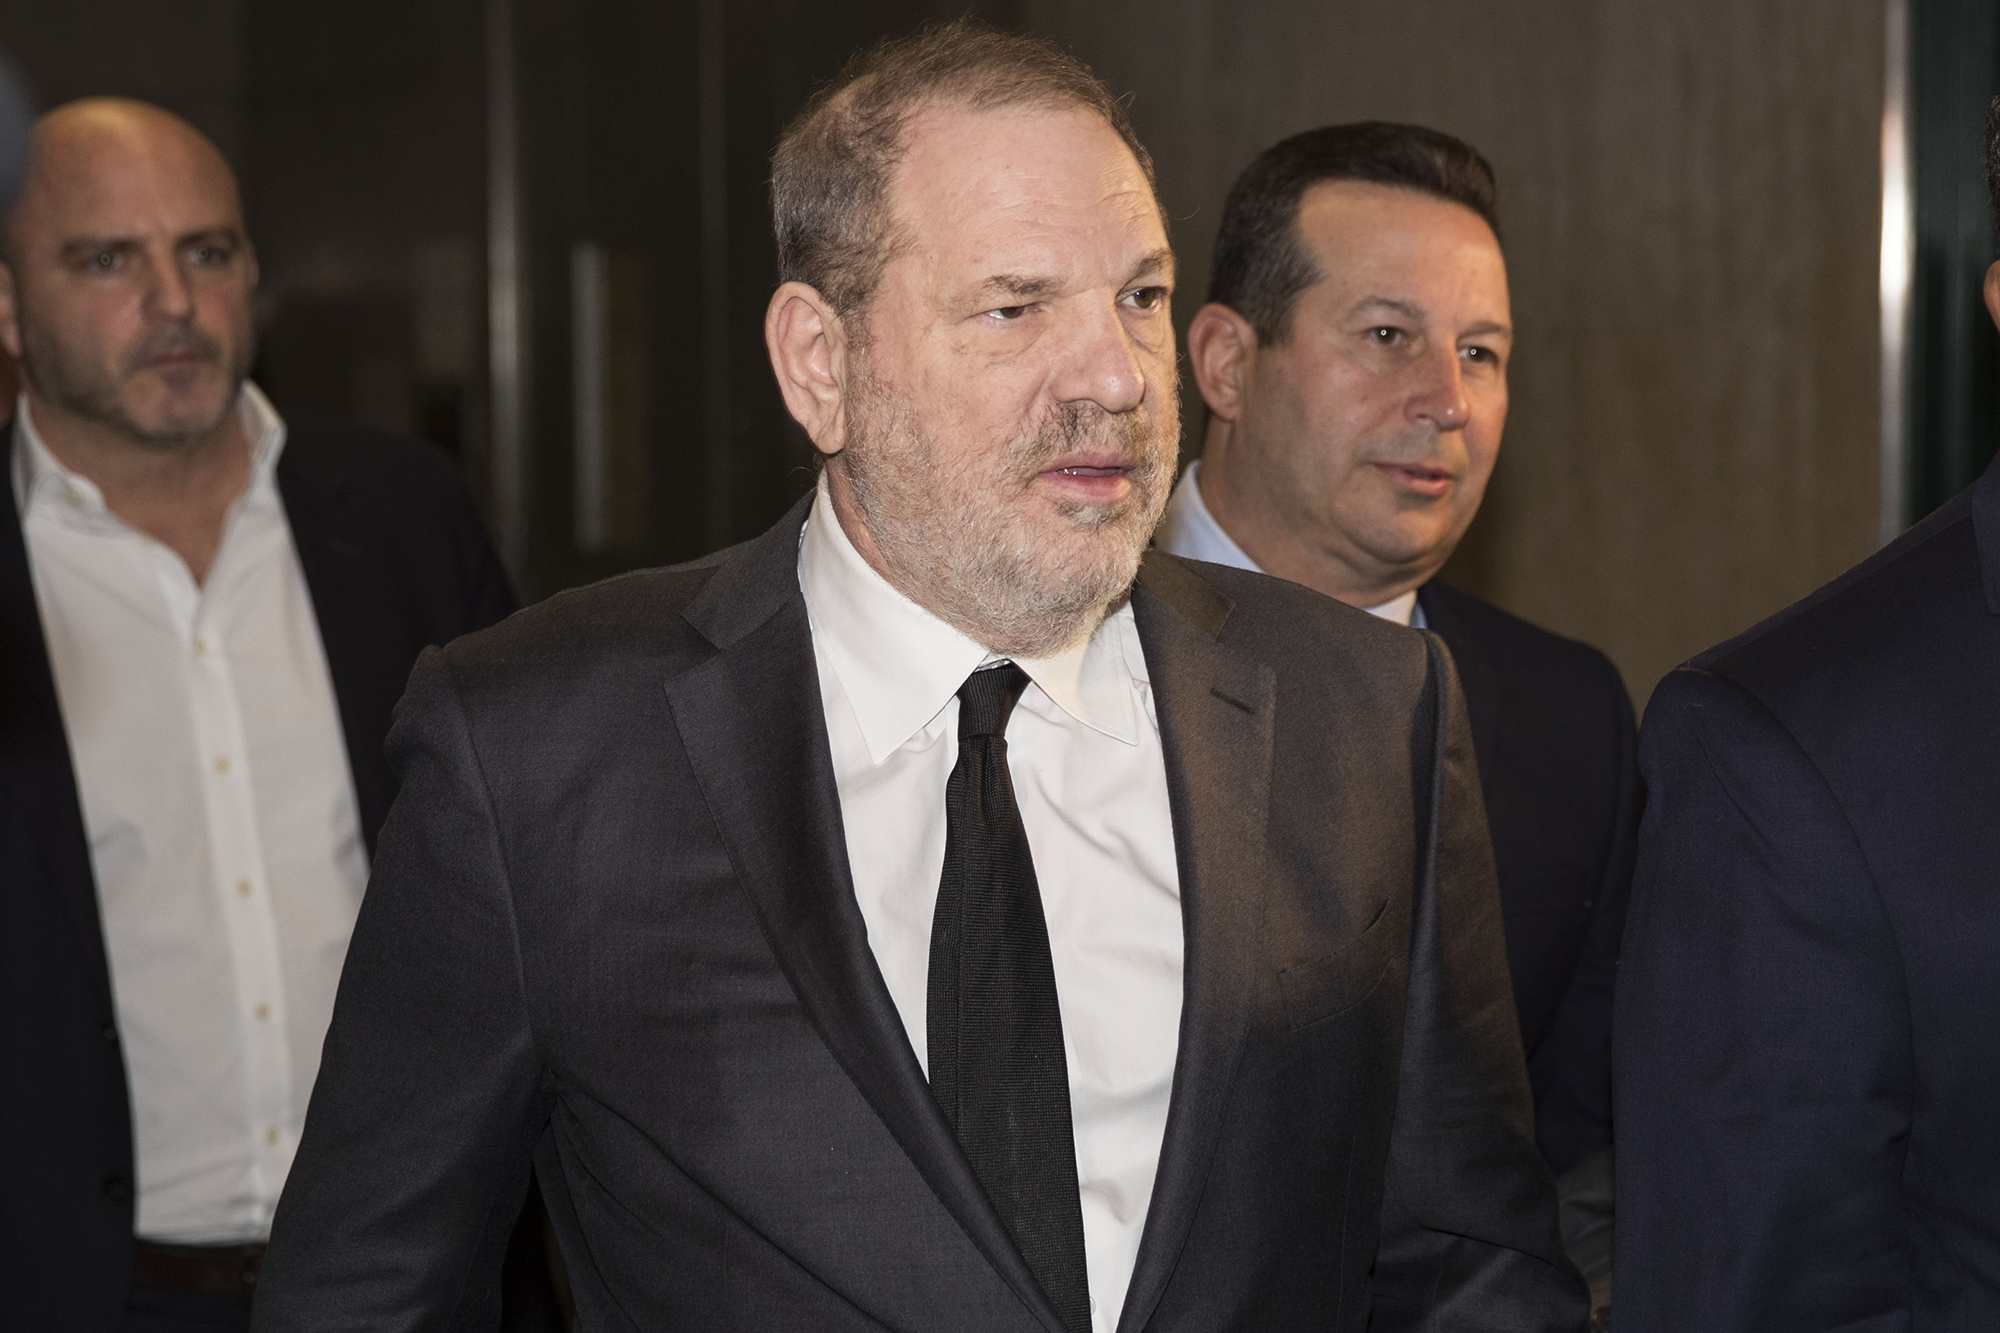 Harvey Weinstein arriving at his trial on January 25, 2020 at the Manhattan Supreme Court.